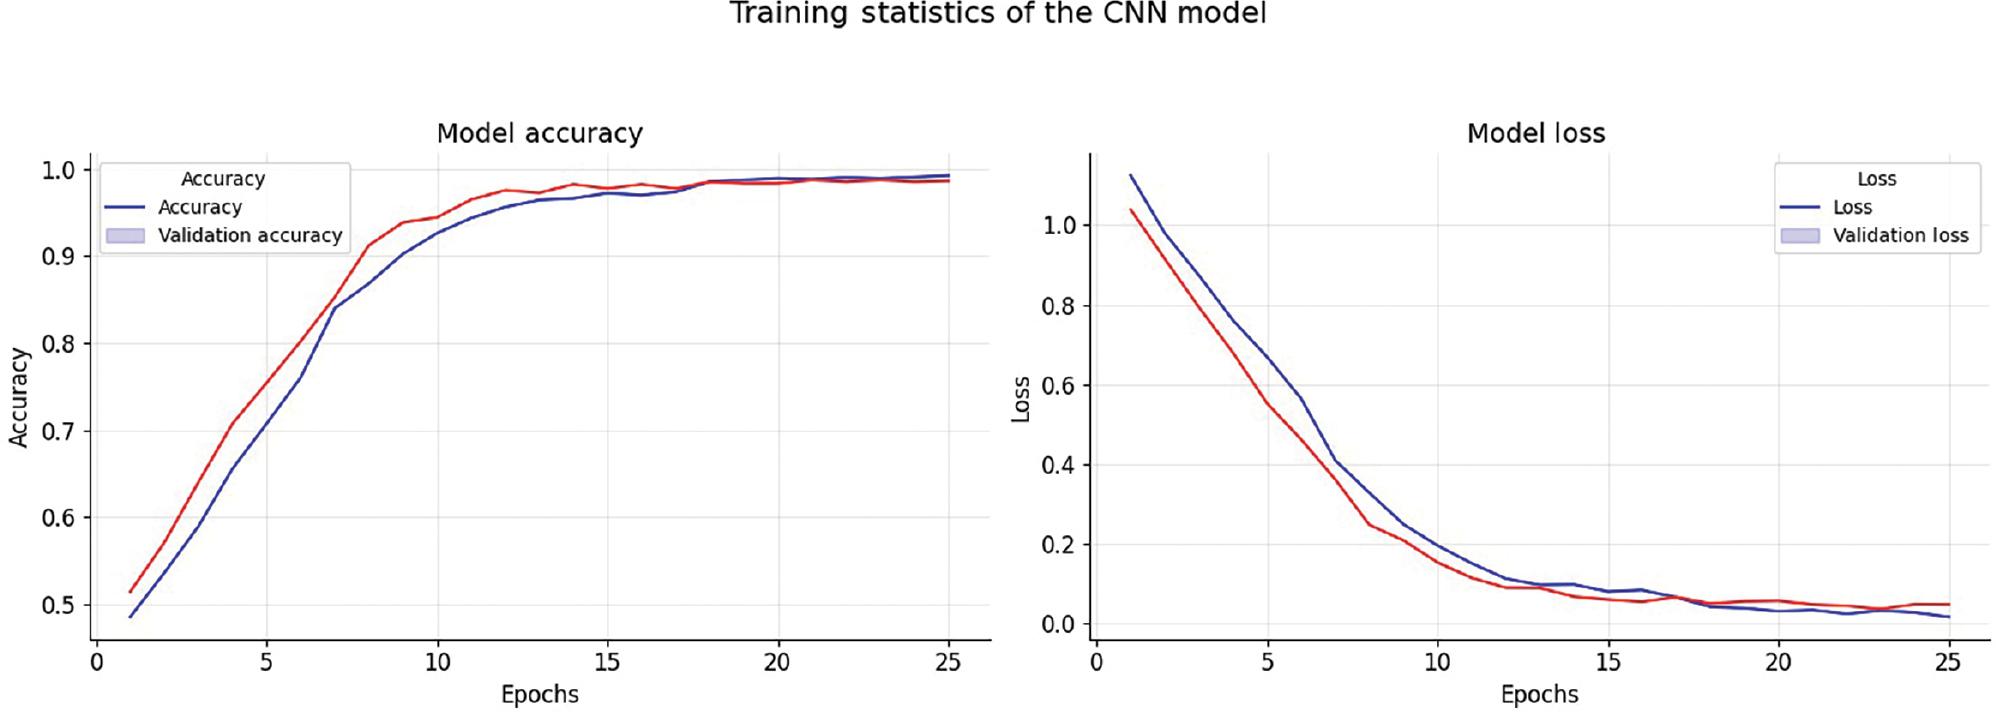 The accuracy and loss during the training phase are displayed on the graph